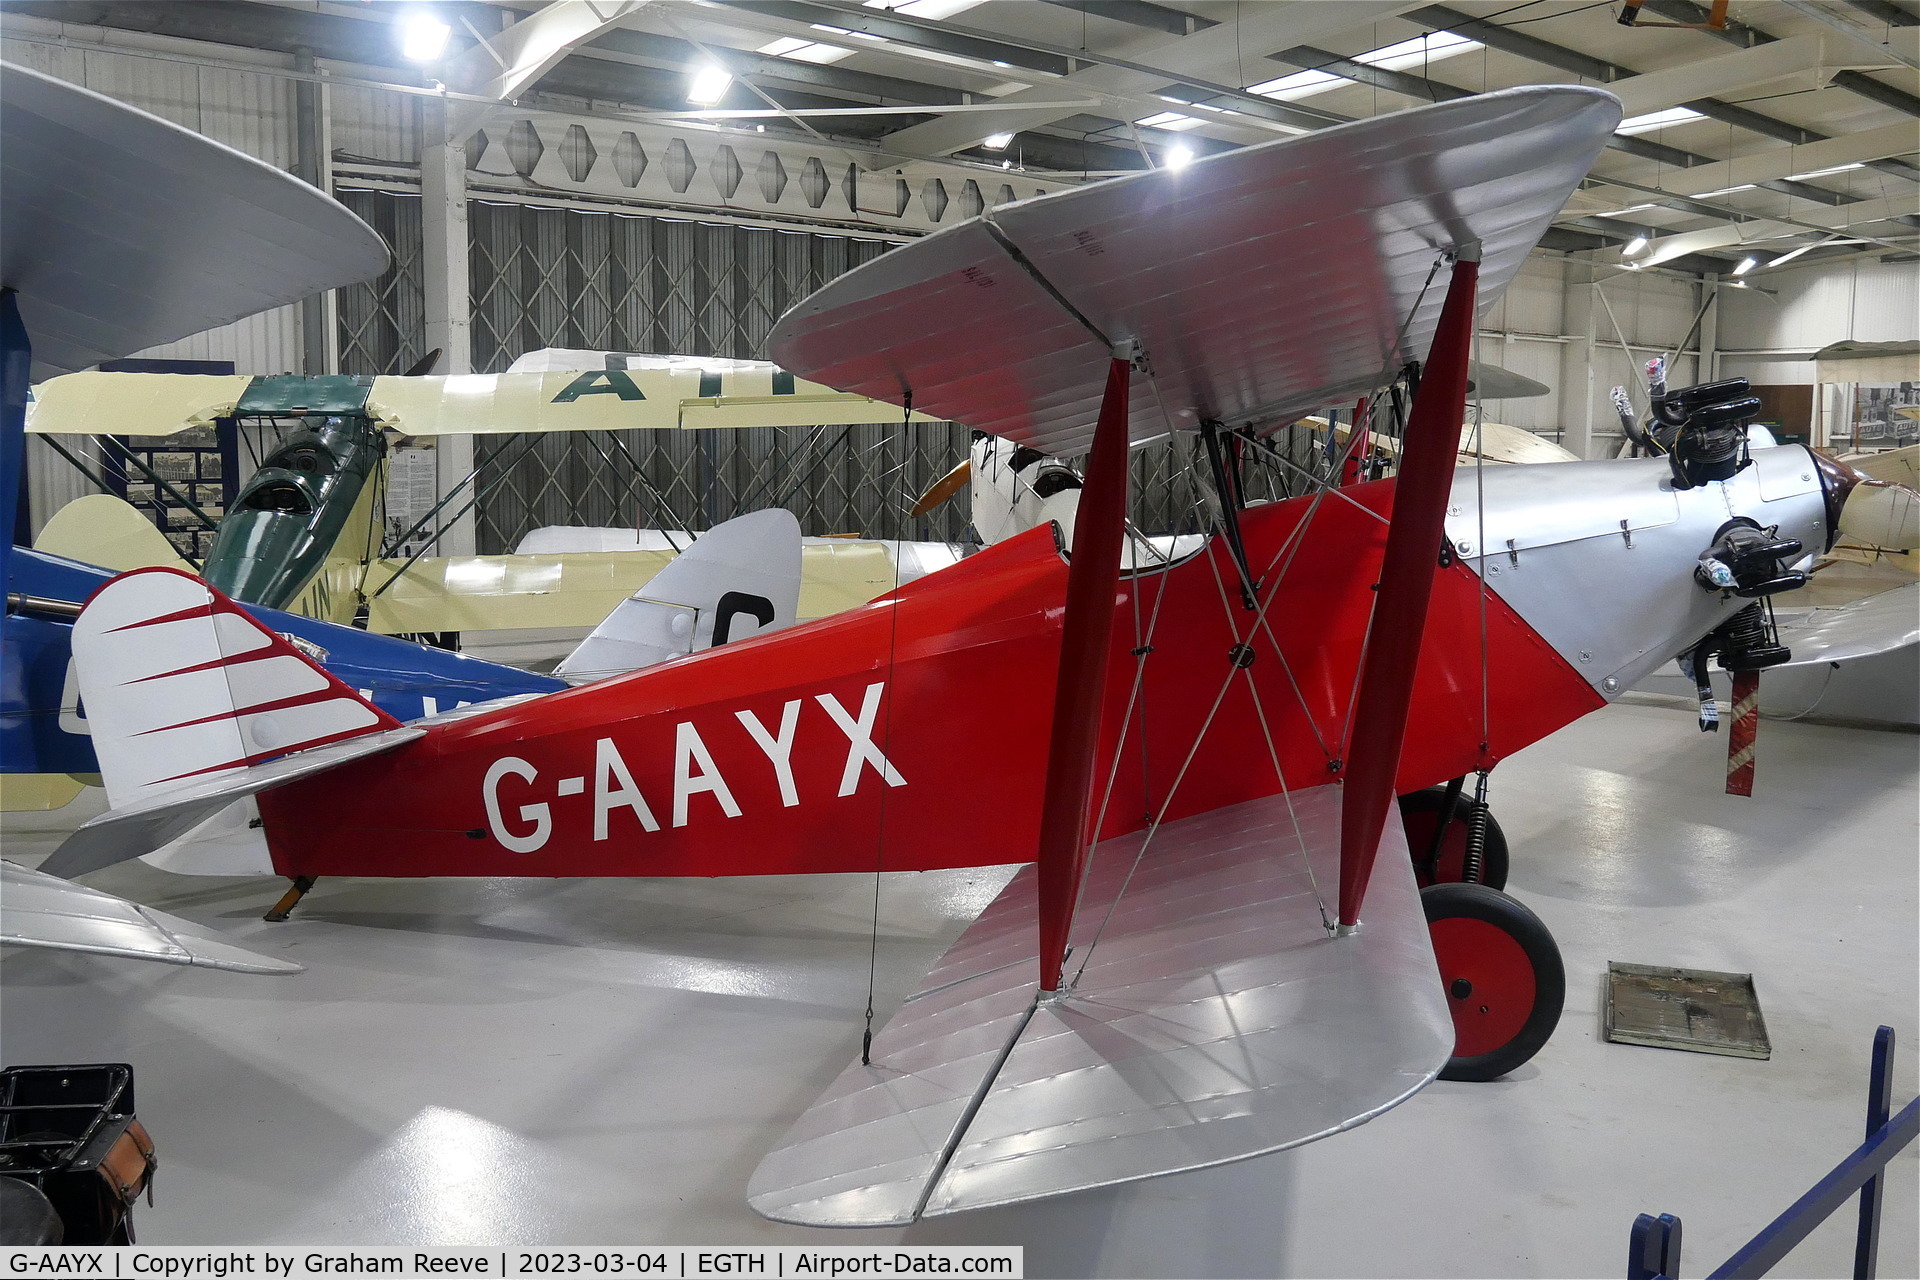 G-AAYX, 1930 Southern Martlet C/N 202, On display at the Shuttleworth Collection, Old Warden.